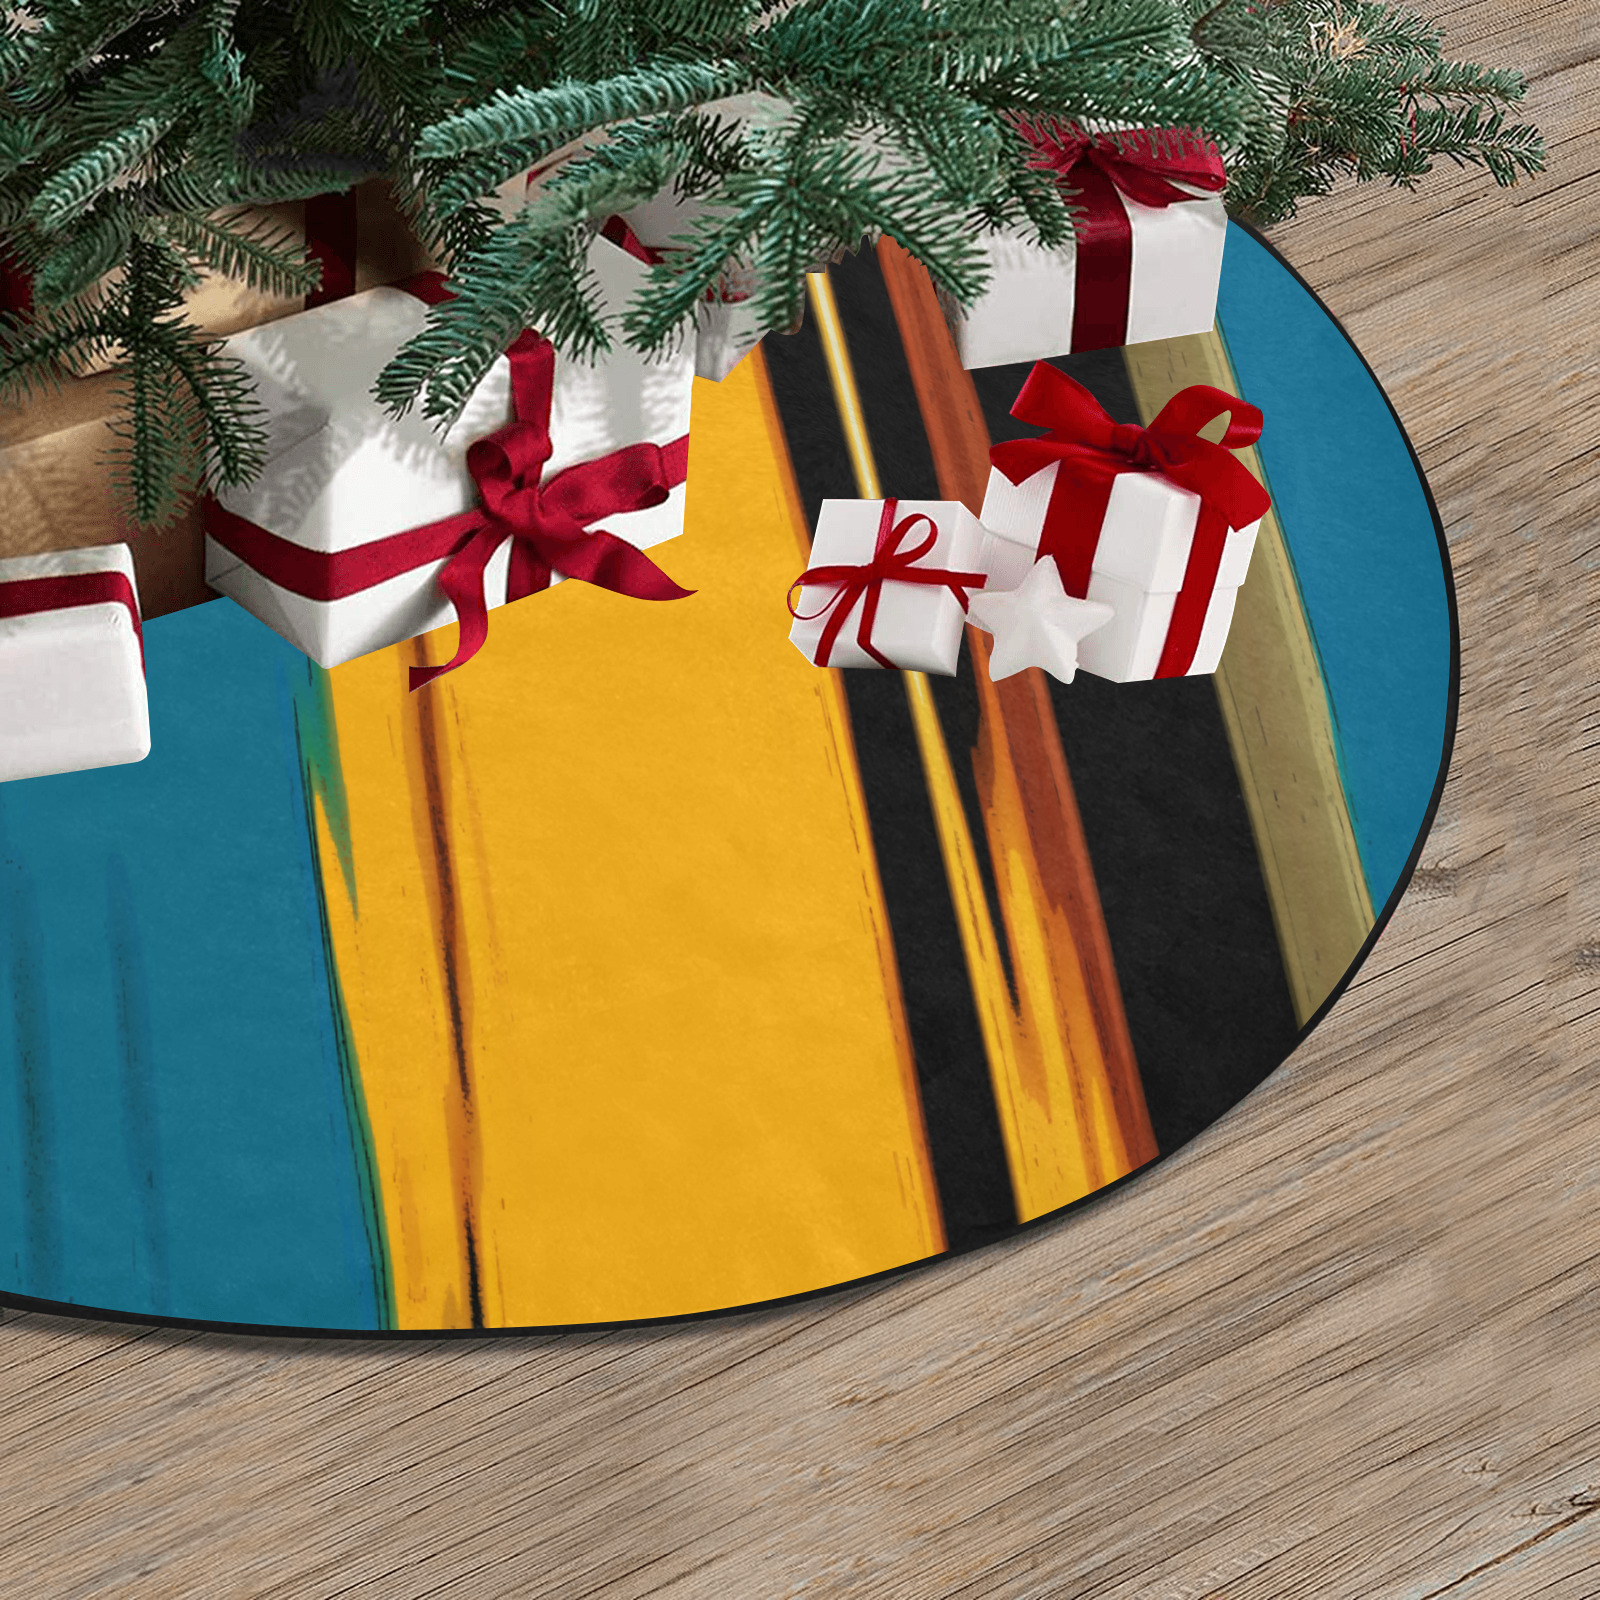 Black Turquoise And Orange Go! Abstract Art Thick Christmas Tree Skirt 30" x 30"